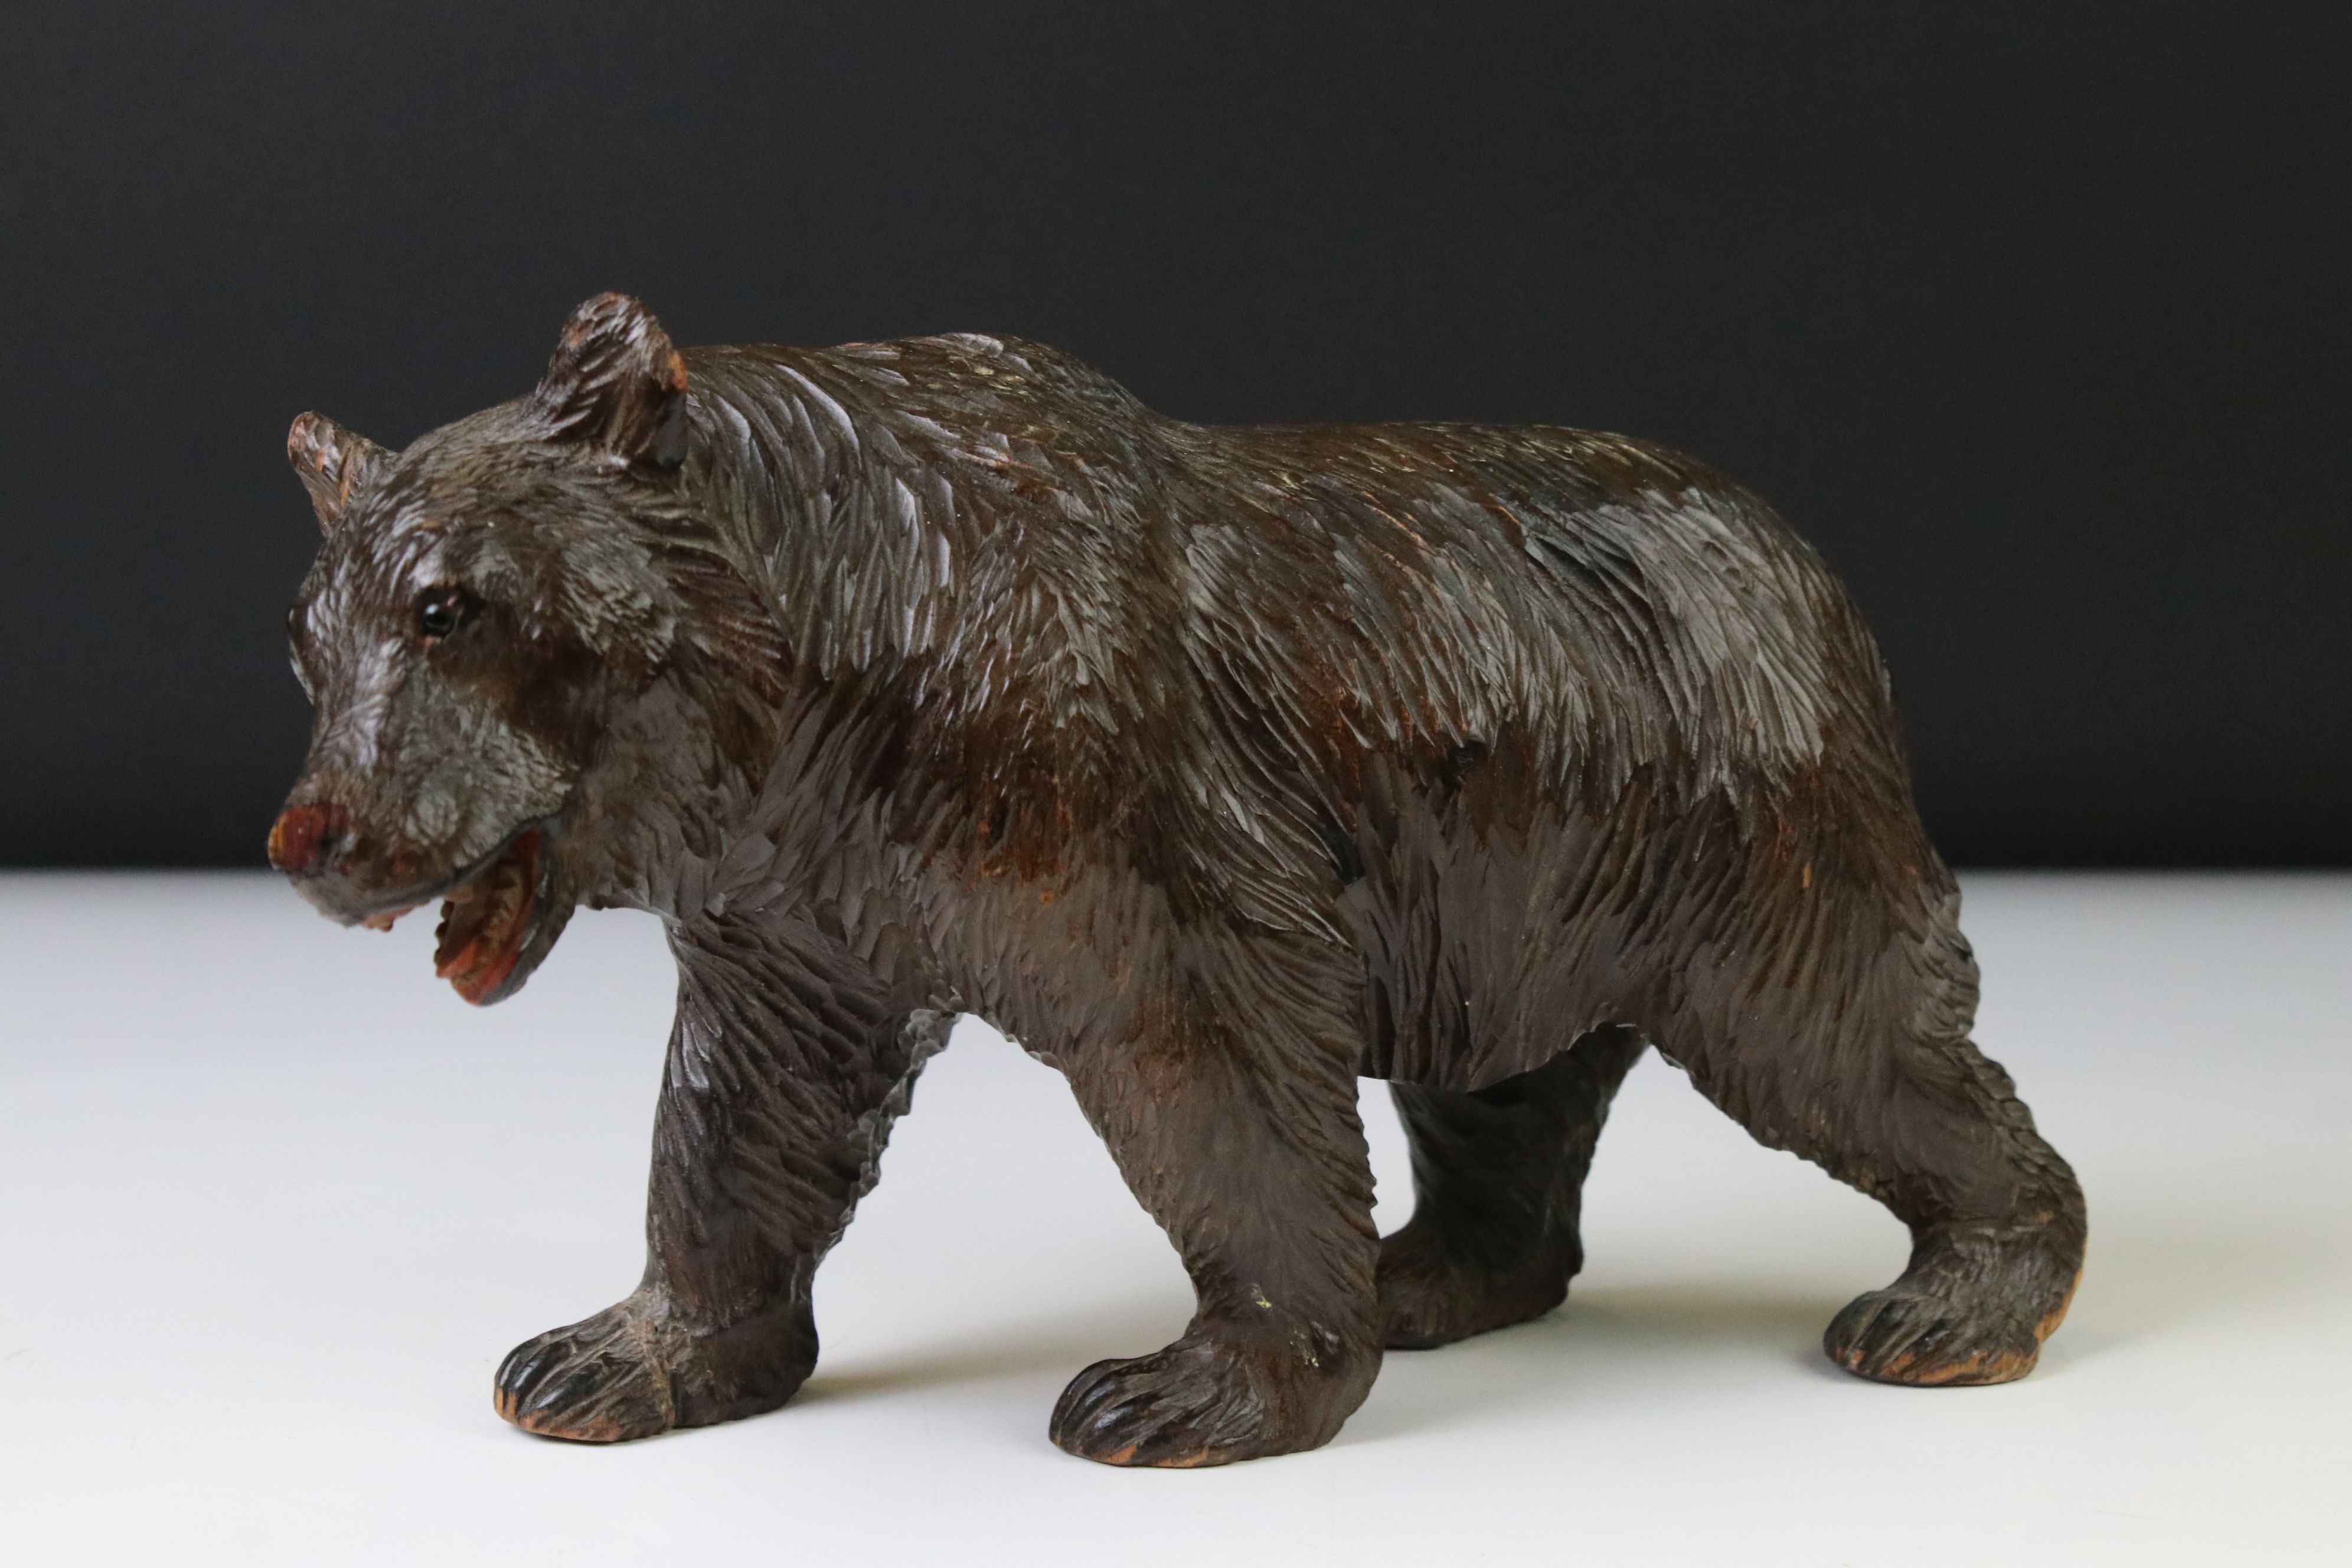 Black Forest style carved figure of a walking bear, mouth open, 25cm long (2 paws a/f)